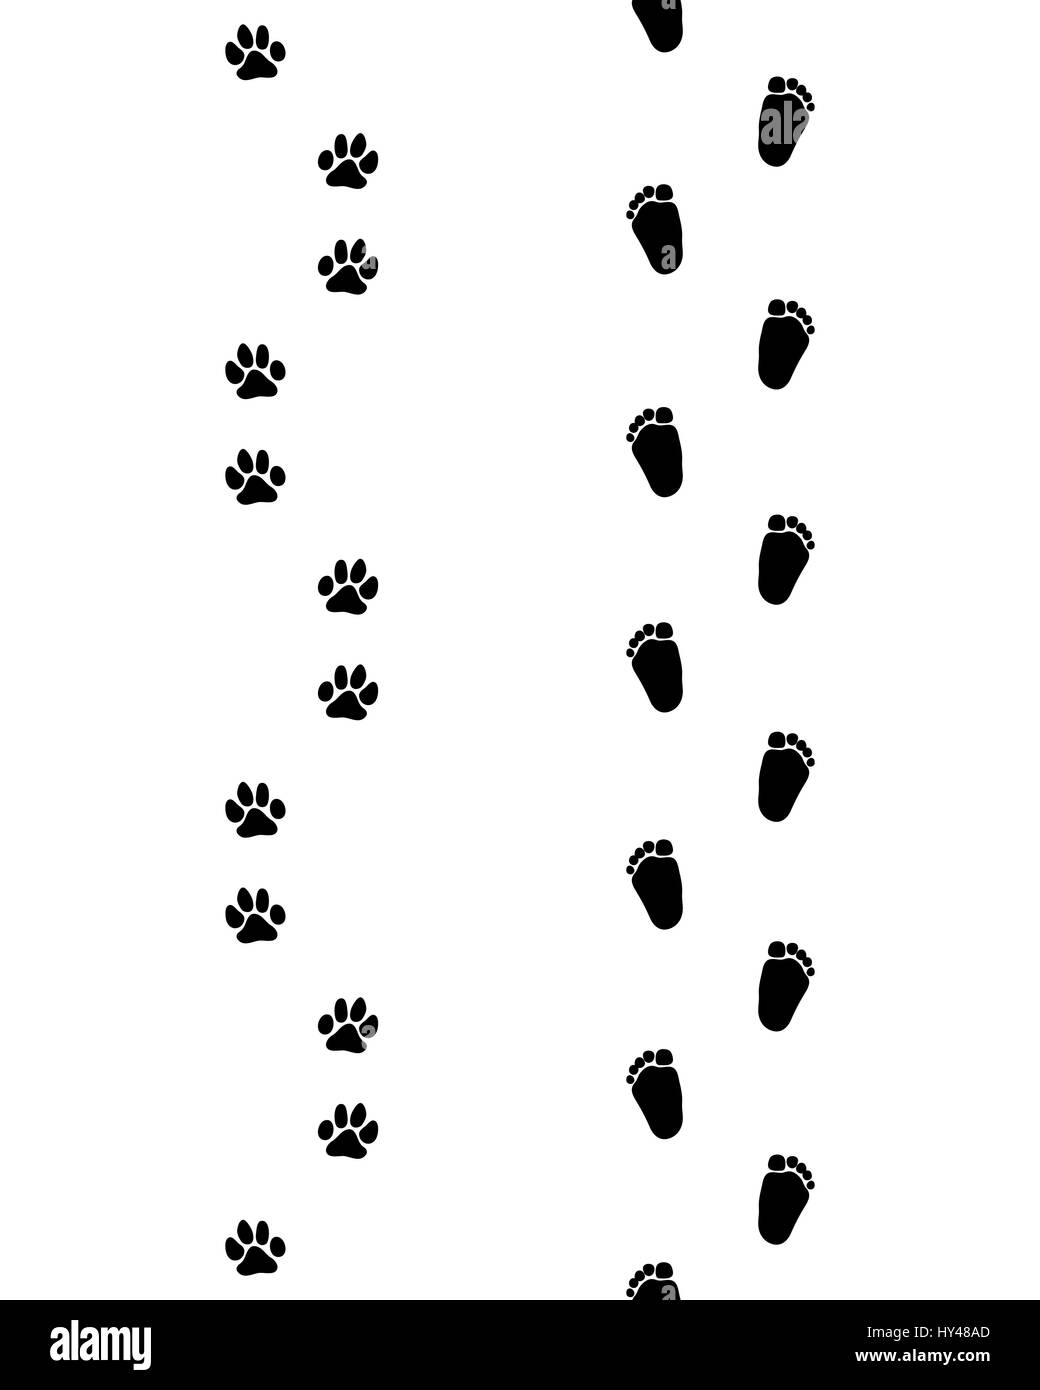 Trail of baby bare feet and dog paws, seamless wallpaper Stock